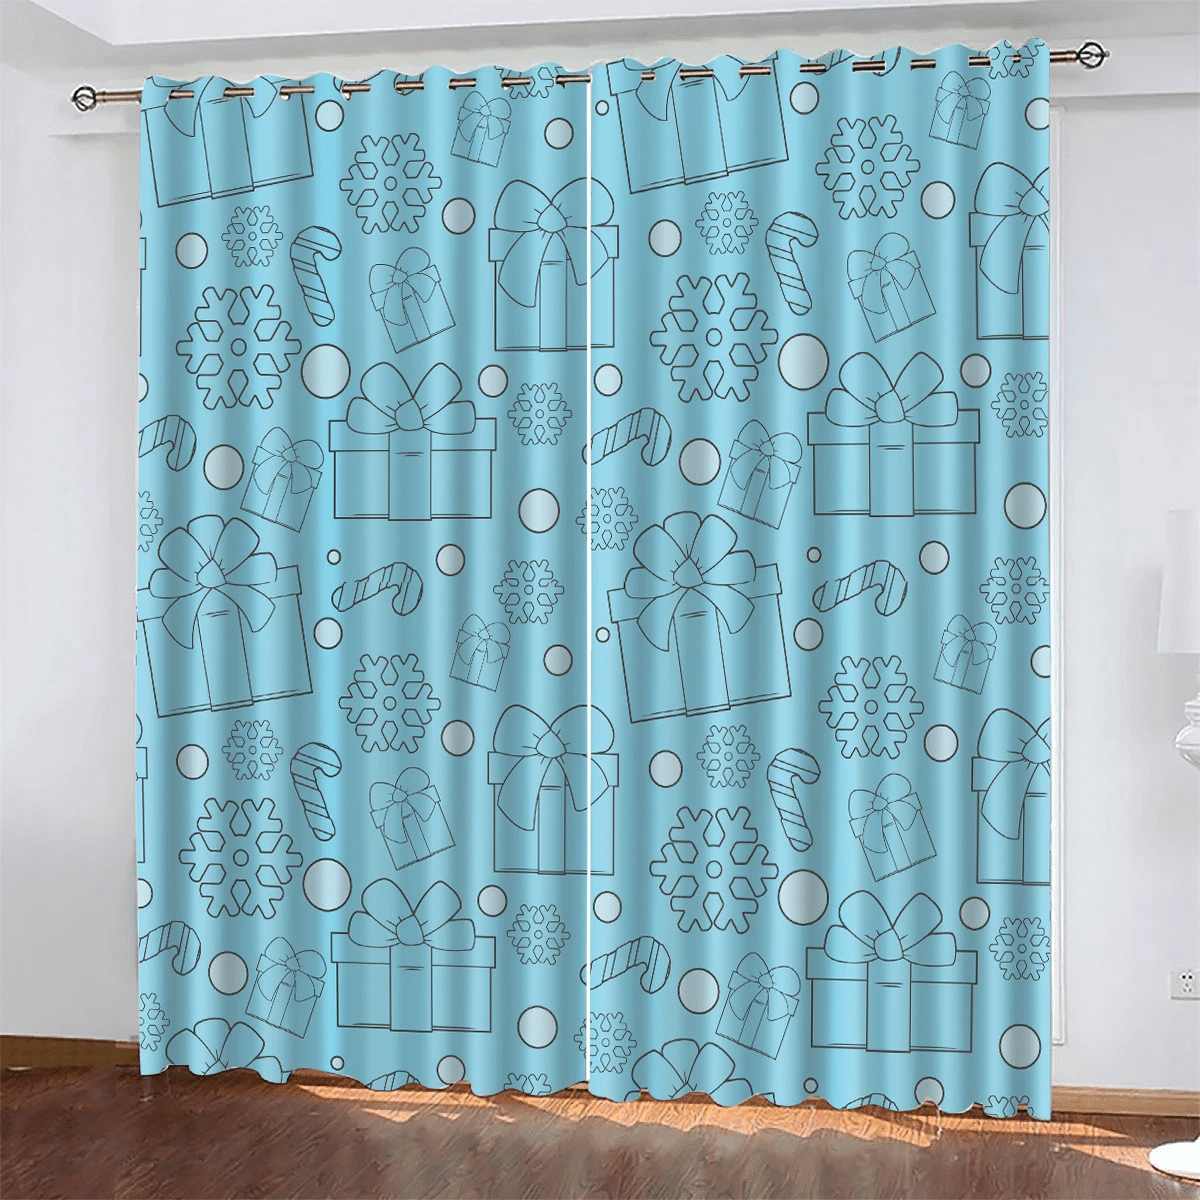 Blue Background Hand Drawn Gift Boxes With Candy Canes Snowflakes Pattern Window Curtains Door Curtains Home Decor